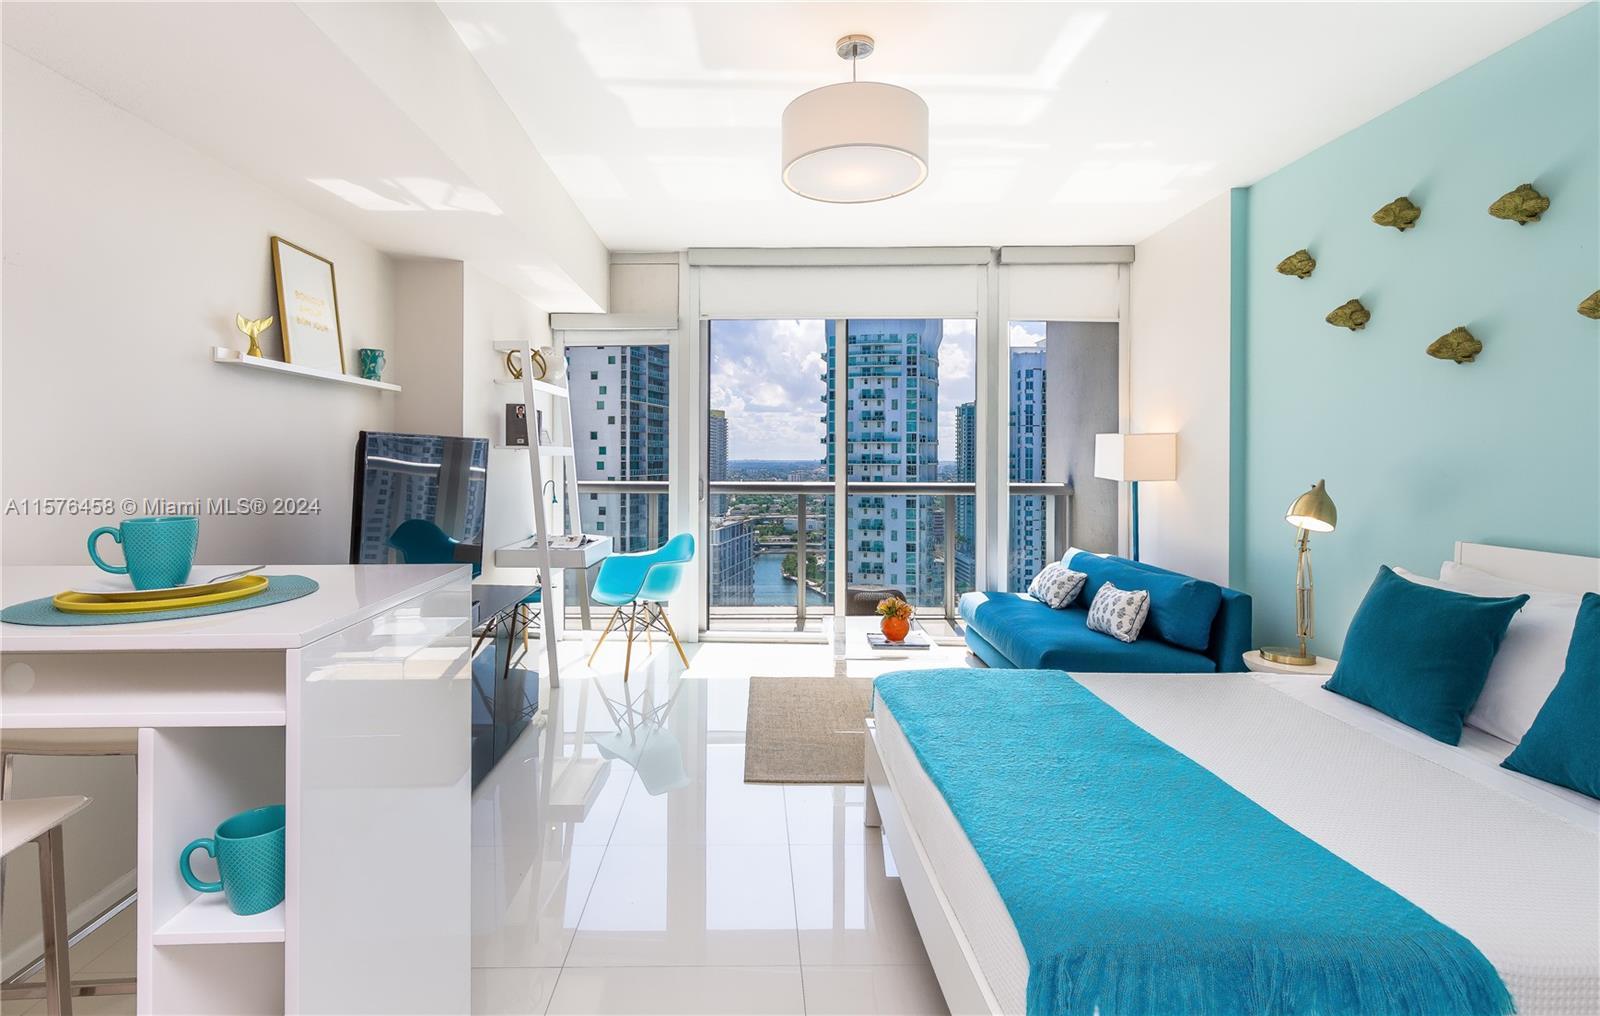 AIRBNB, no restrictions. On a high story, with floor-to-ceiling glass walls, this Icon Brickell Resi